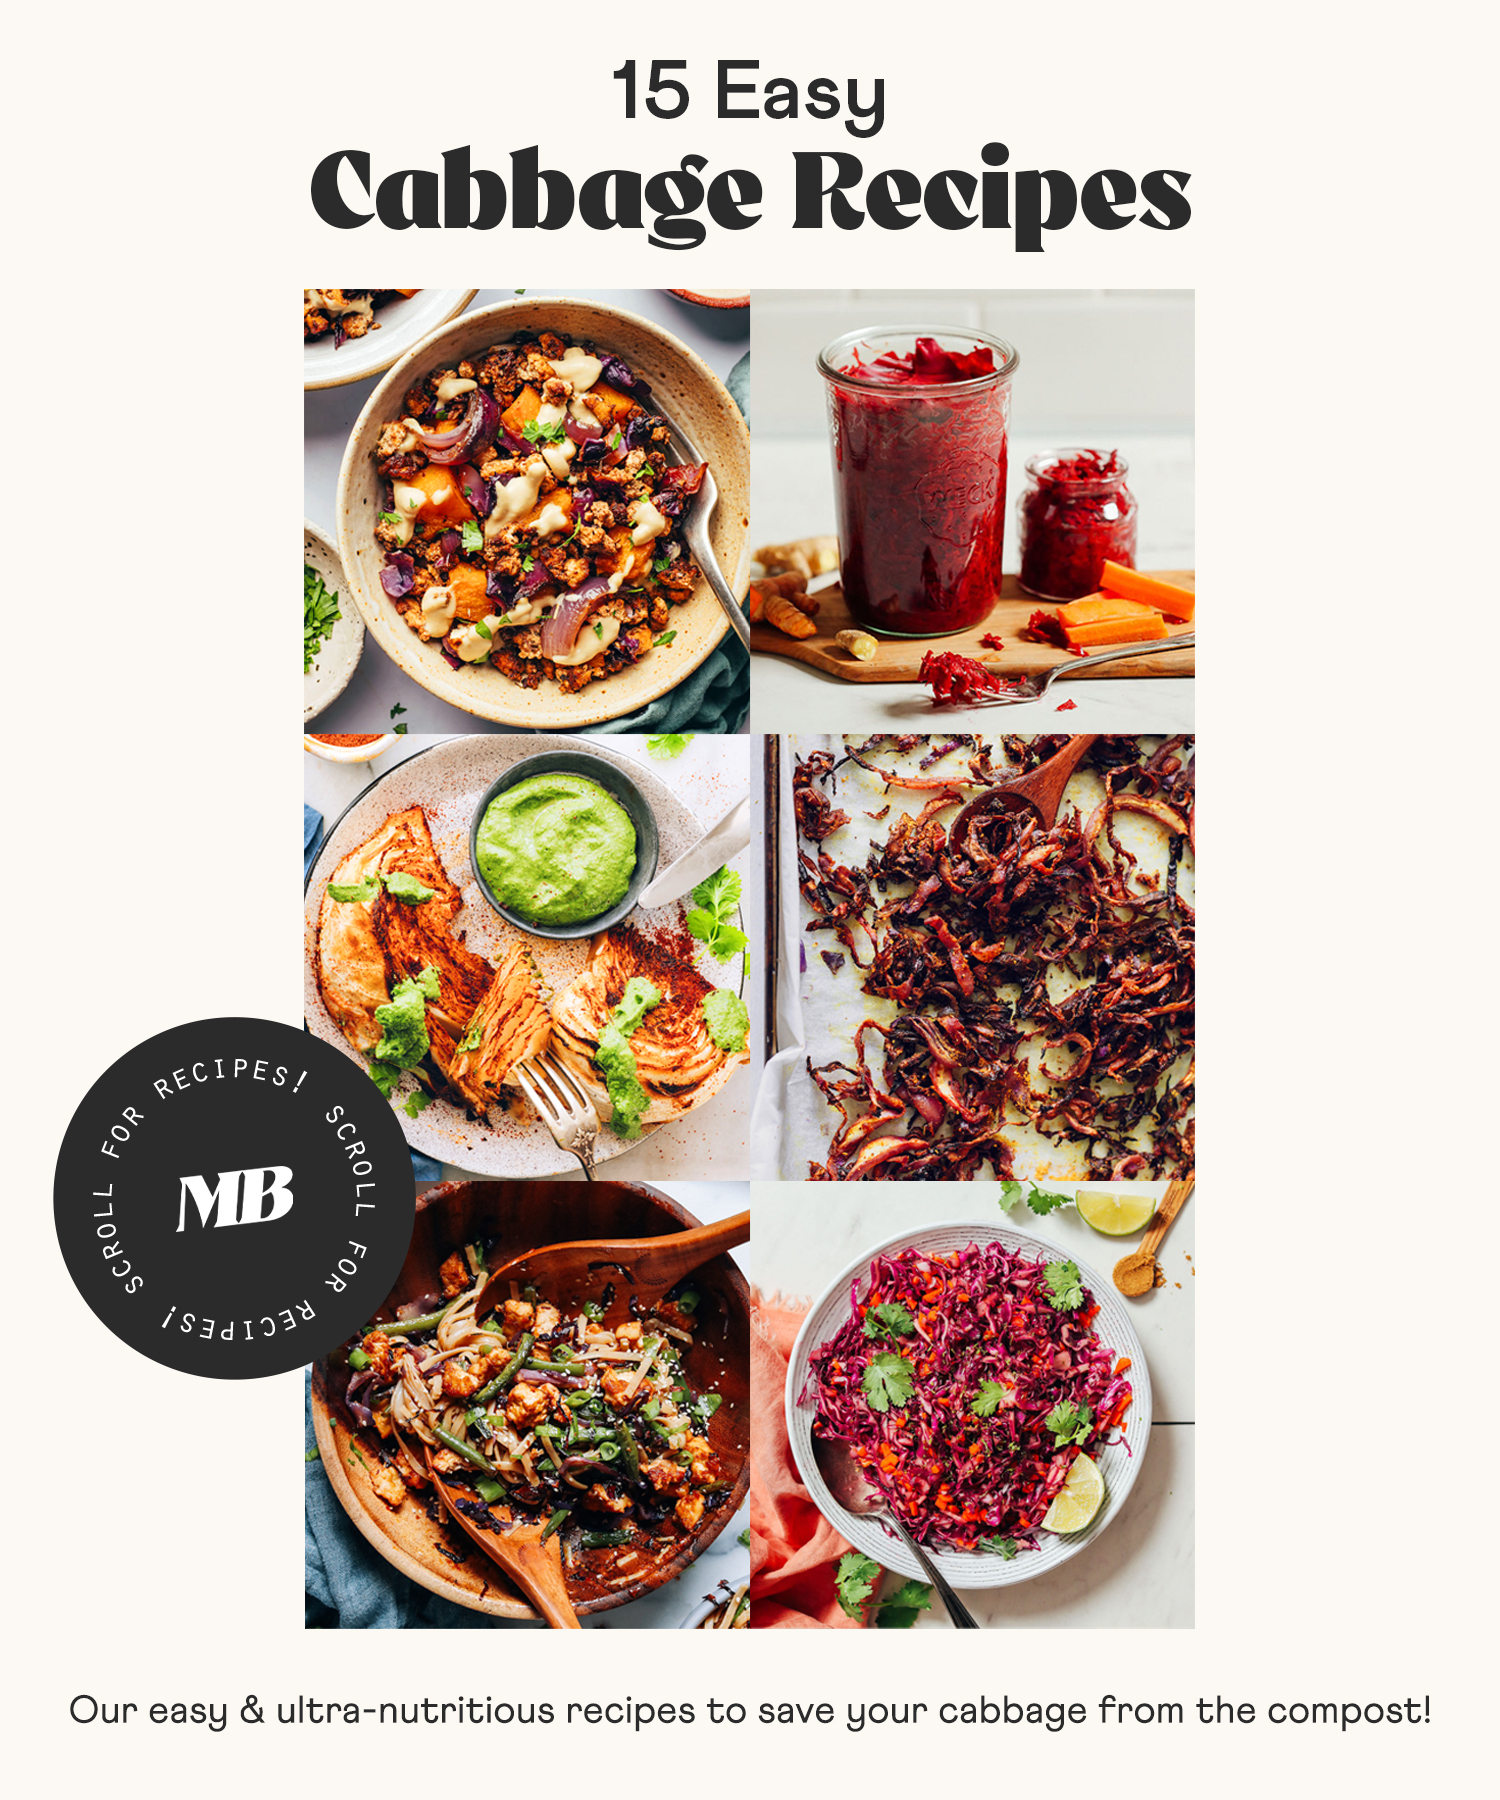 Photos of some of our easy cabbage recipes that use a lot of cabbage